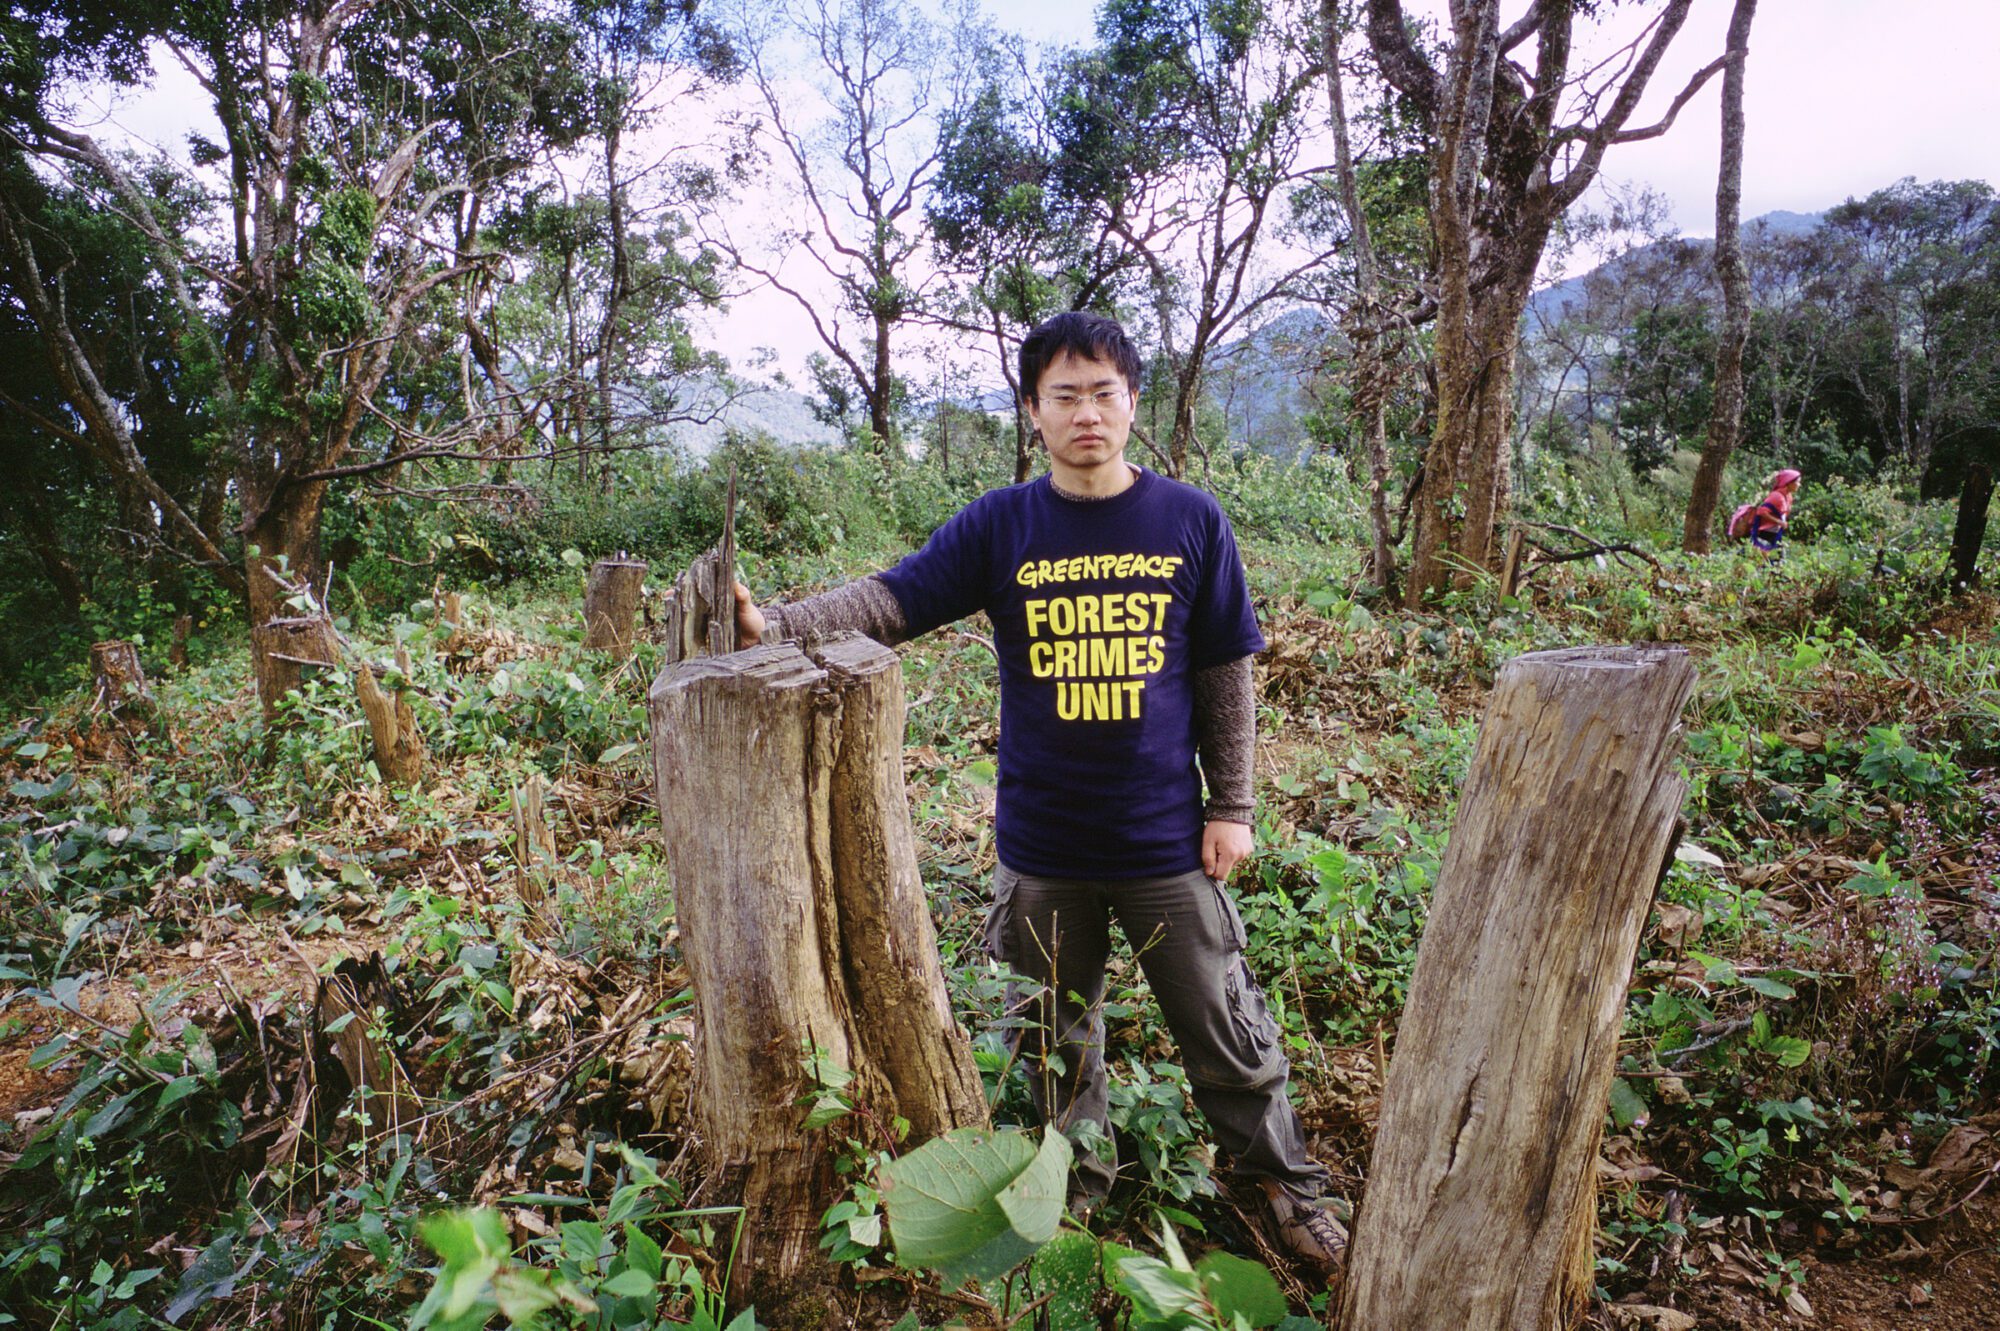 A man stands in a forest arounud surrounded by tree stumps